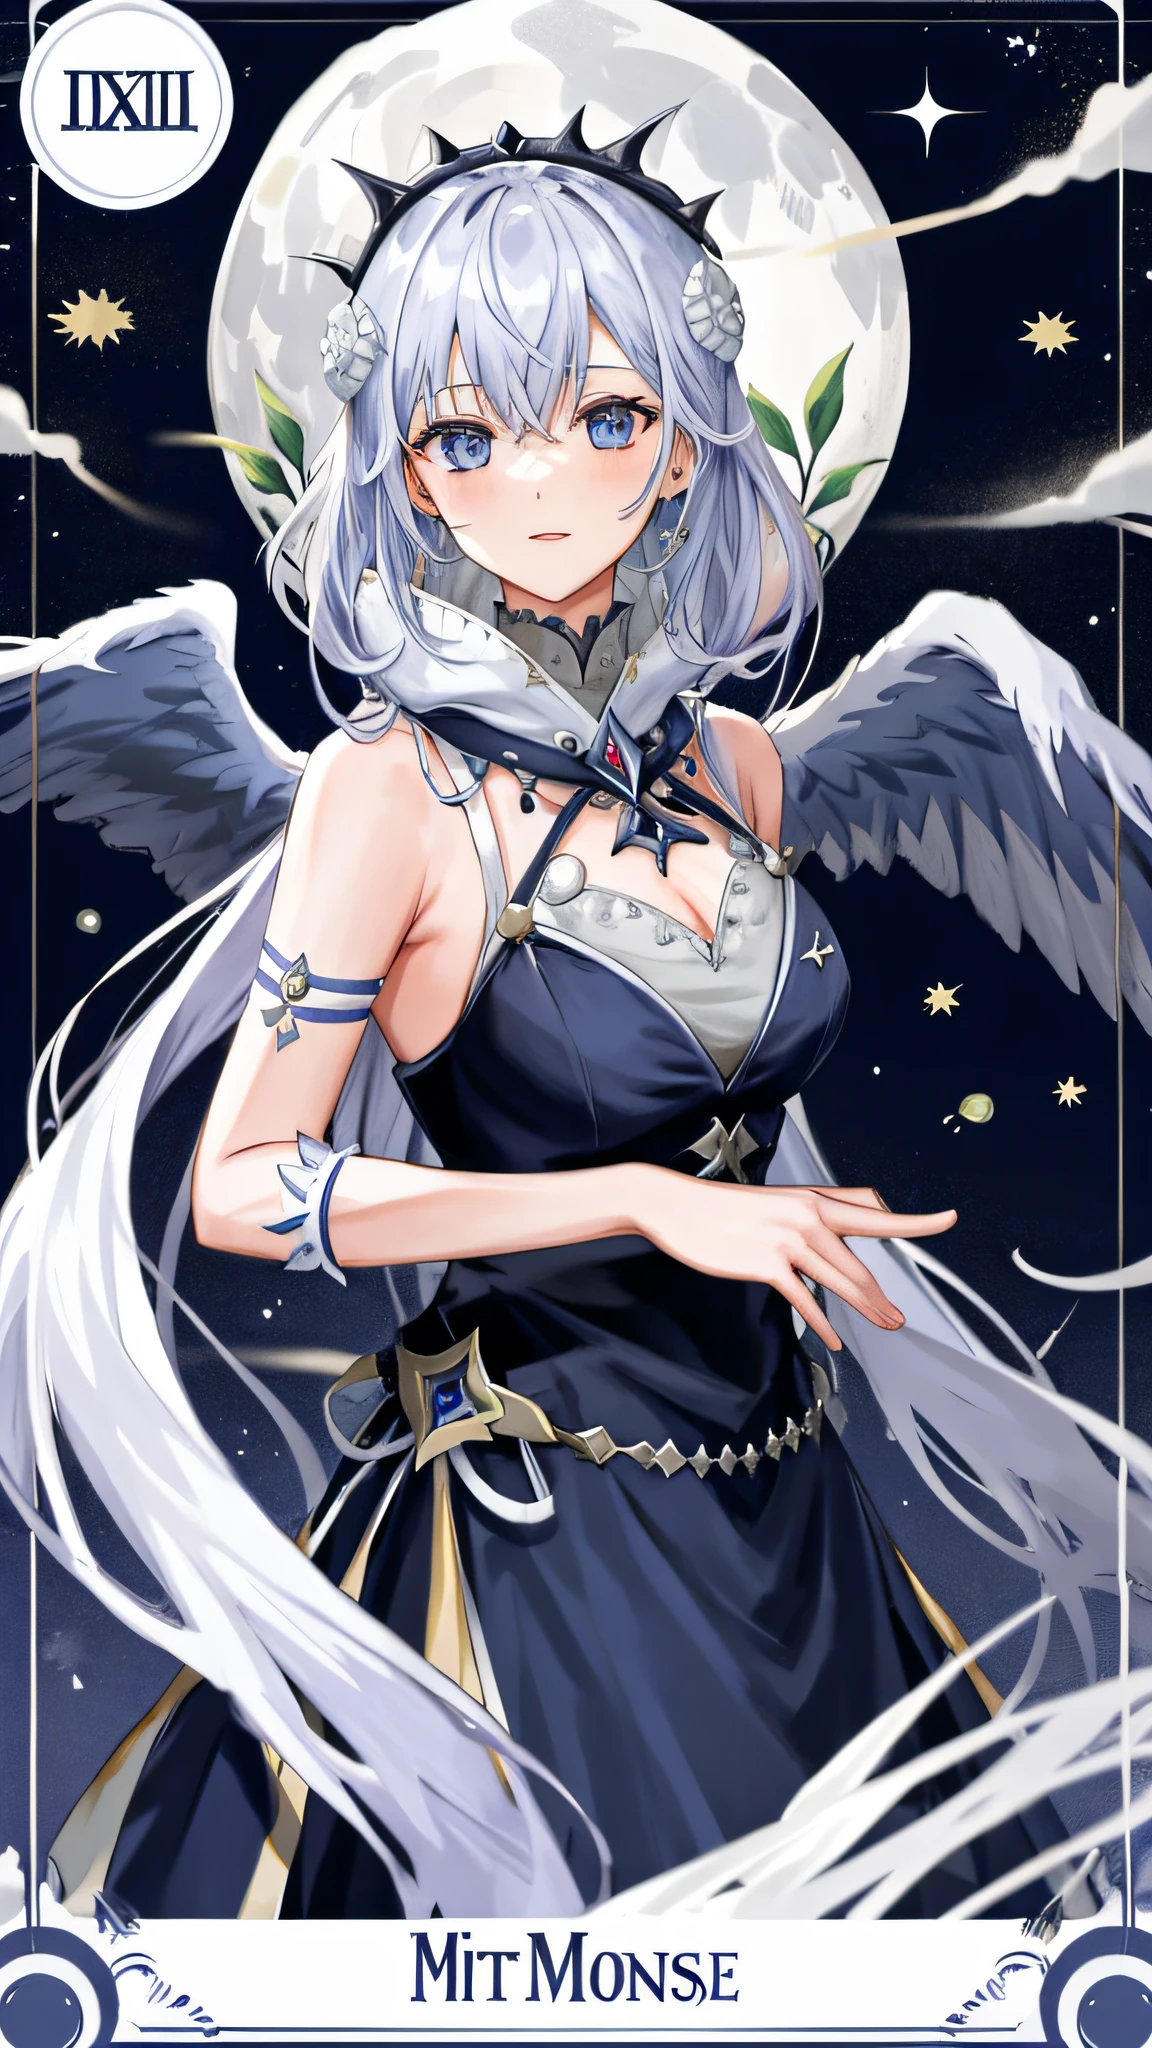 a close up of a woman with a bird on her head, as a mystical valkyrie, white-haired god, angel knight girl, Beautiful celestial mage, full - body majestic angel, Anime goddess, sky witch, silver wings, low angel, mystical valkyrie, astral fairy, high detailed official artwork, with large wings, Anime fantasy illustration, tall female angel, highly detailed exquisite fanart